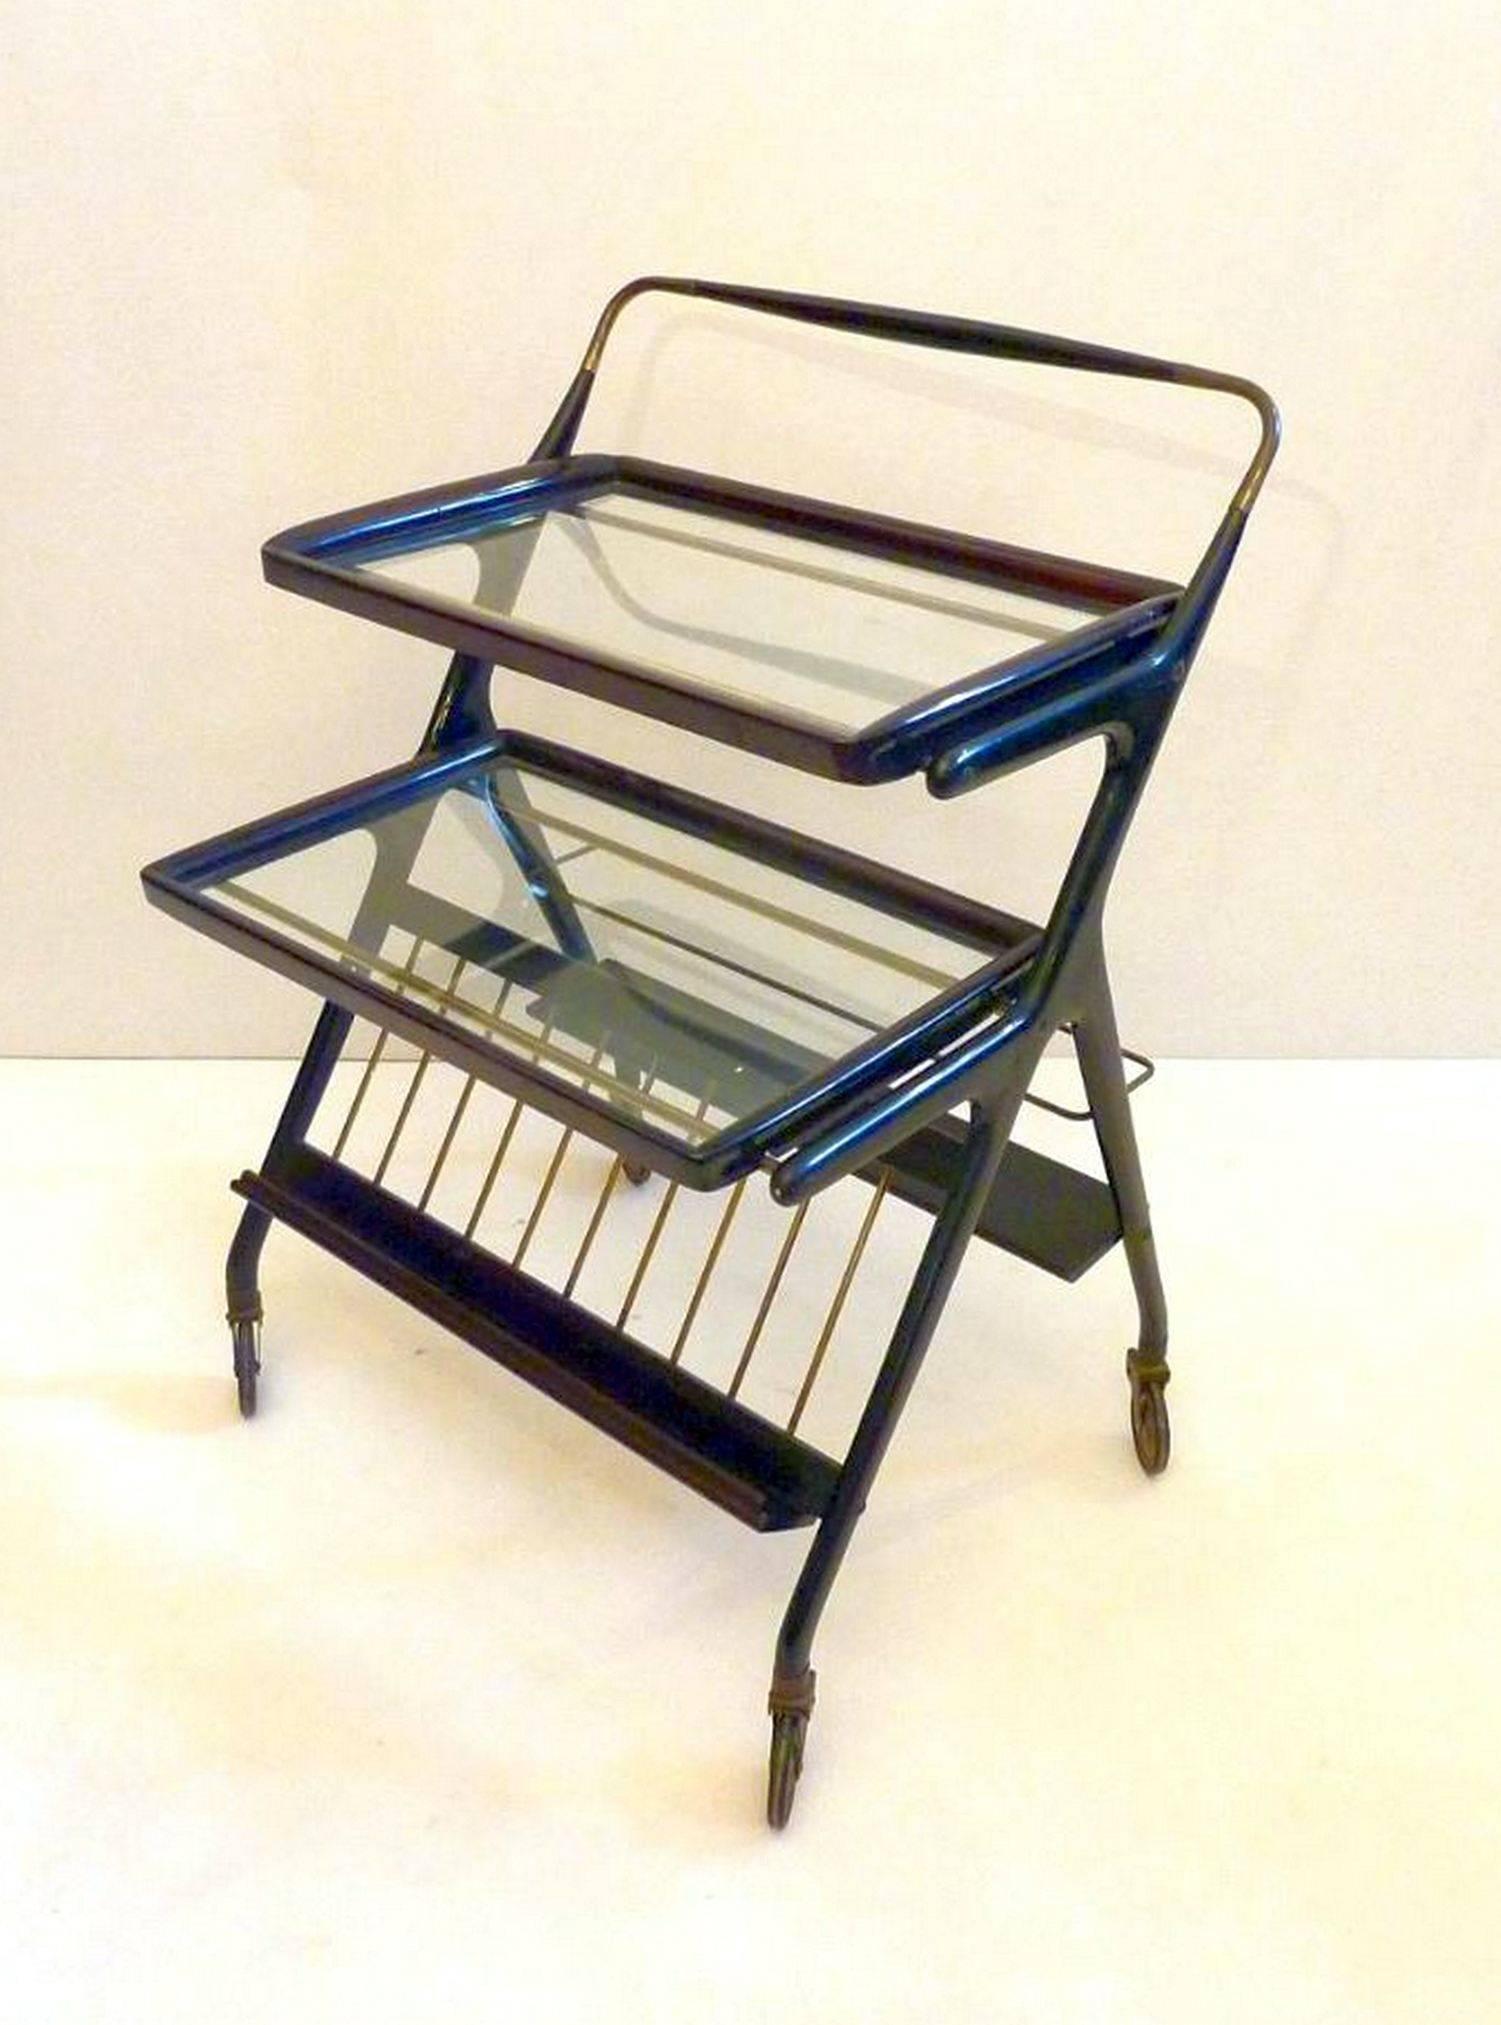 Multi-functional trolley with bottle rack, magazine holder as well as having two trays that both are removable. Original wheels in good condition. The structure is made in stained beechwood with brass details.